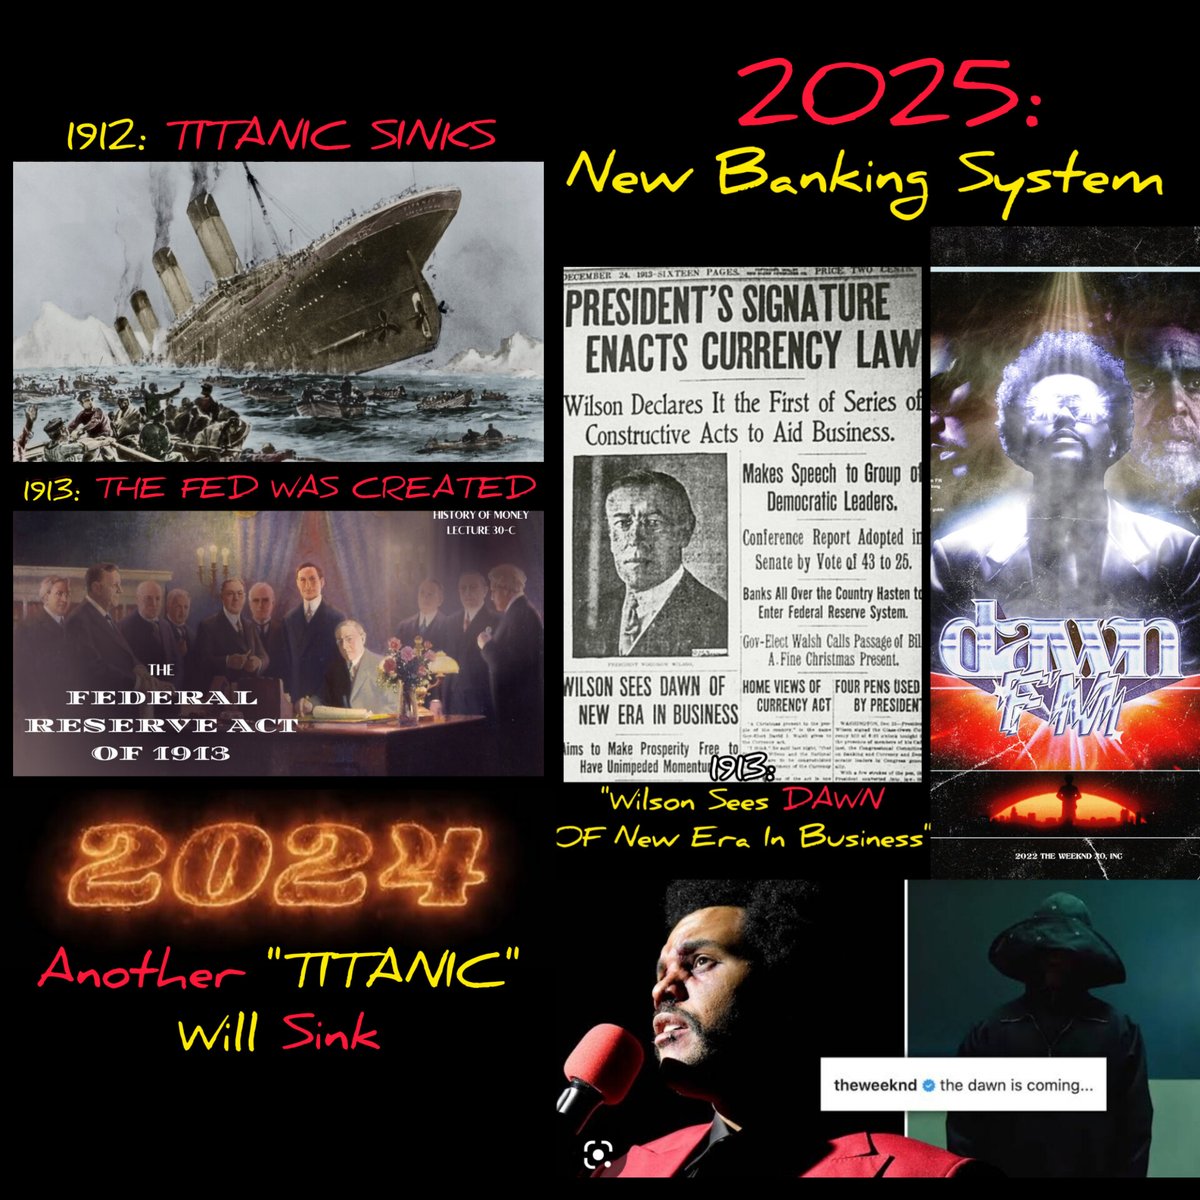 The #FederalReserve Was Created 1 Year After The #TITANIC Sank
__
I Think 2024 We Could See Another '#Titanic' Event..

Which Will Help Usher In A New #BankingSystem In 2025

(Just Like In 1912-1913)

#HistoryAlwaysRepeats

#TheMatrixology